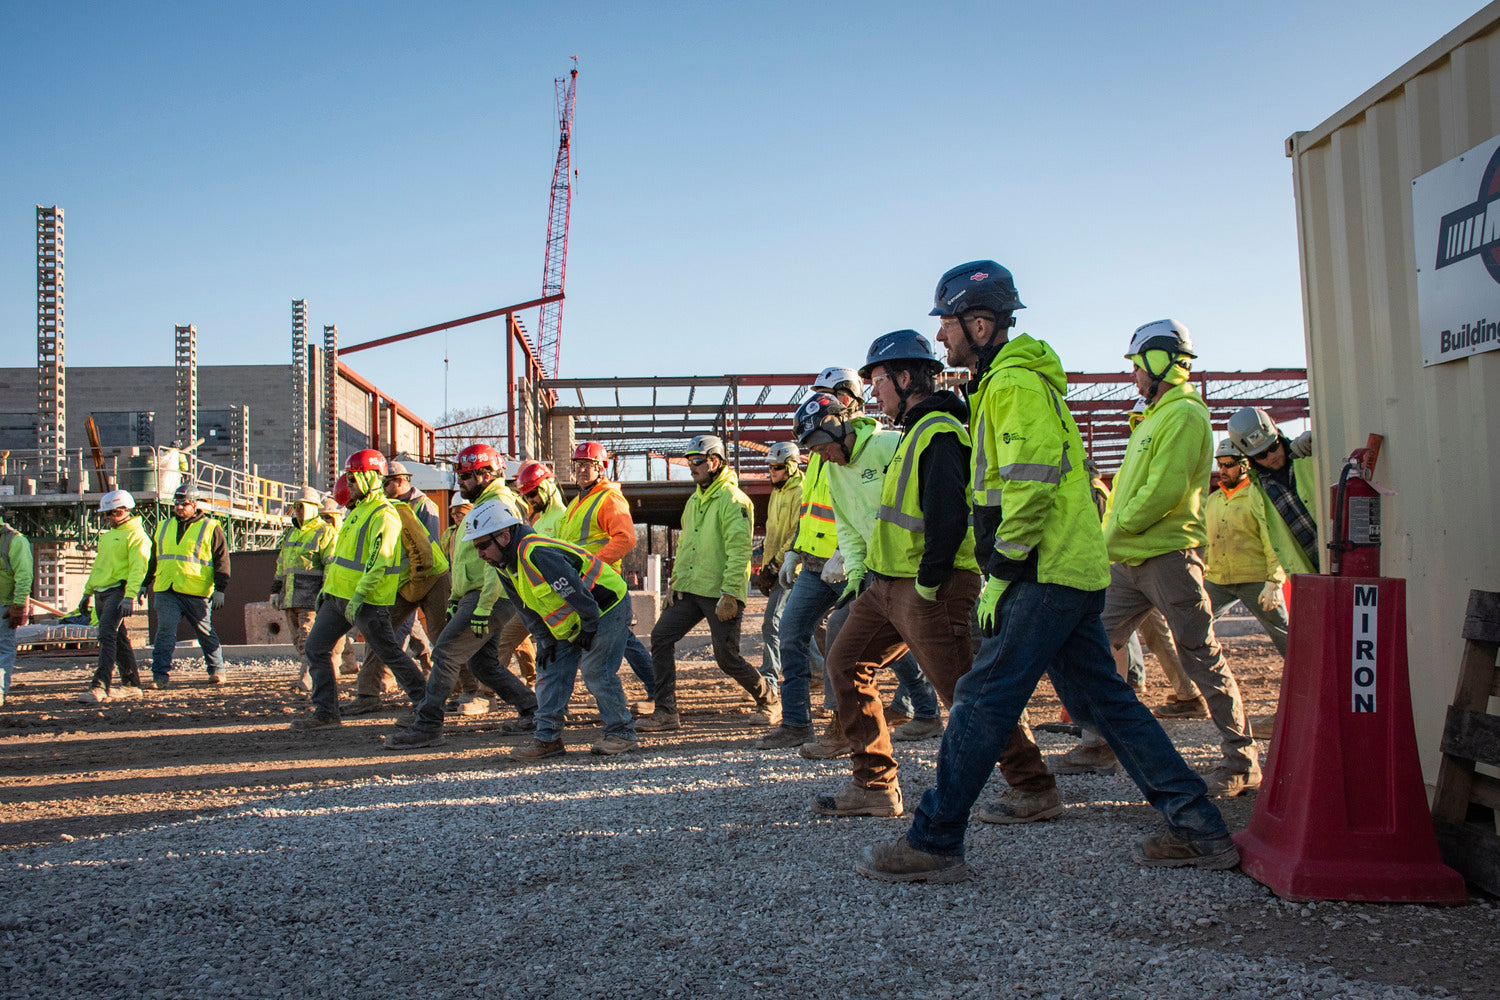 Miron Construction Invests in STUDSON Type II Safety Helmets to Improve Project Site Safety